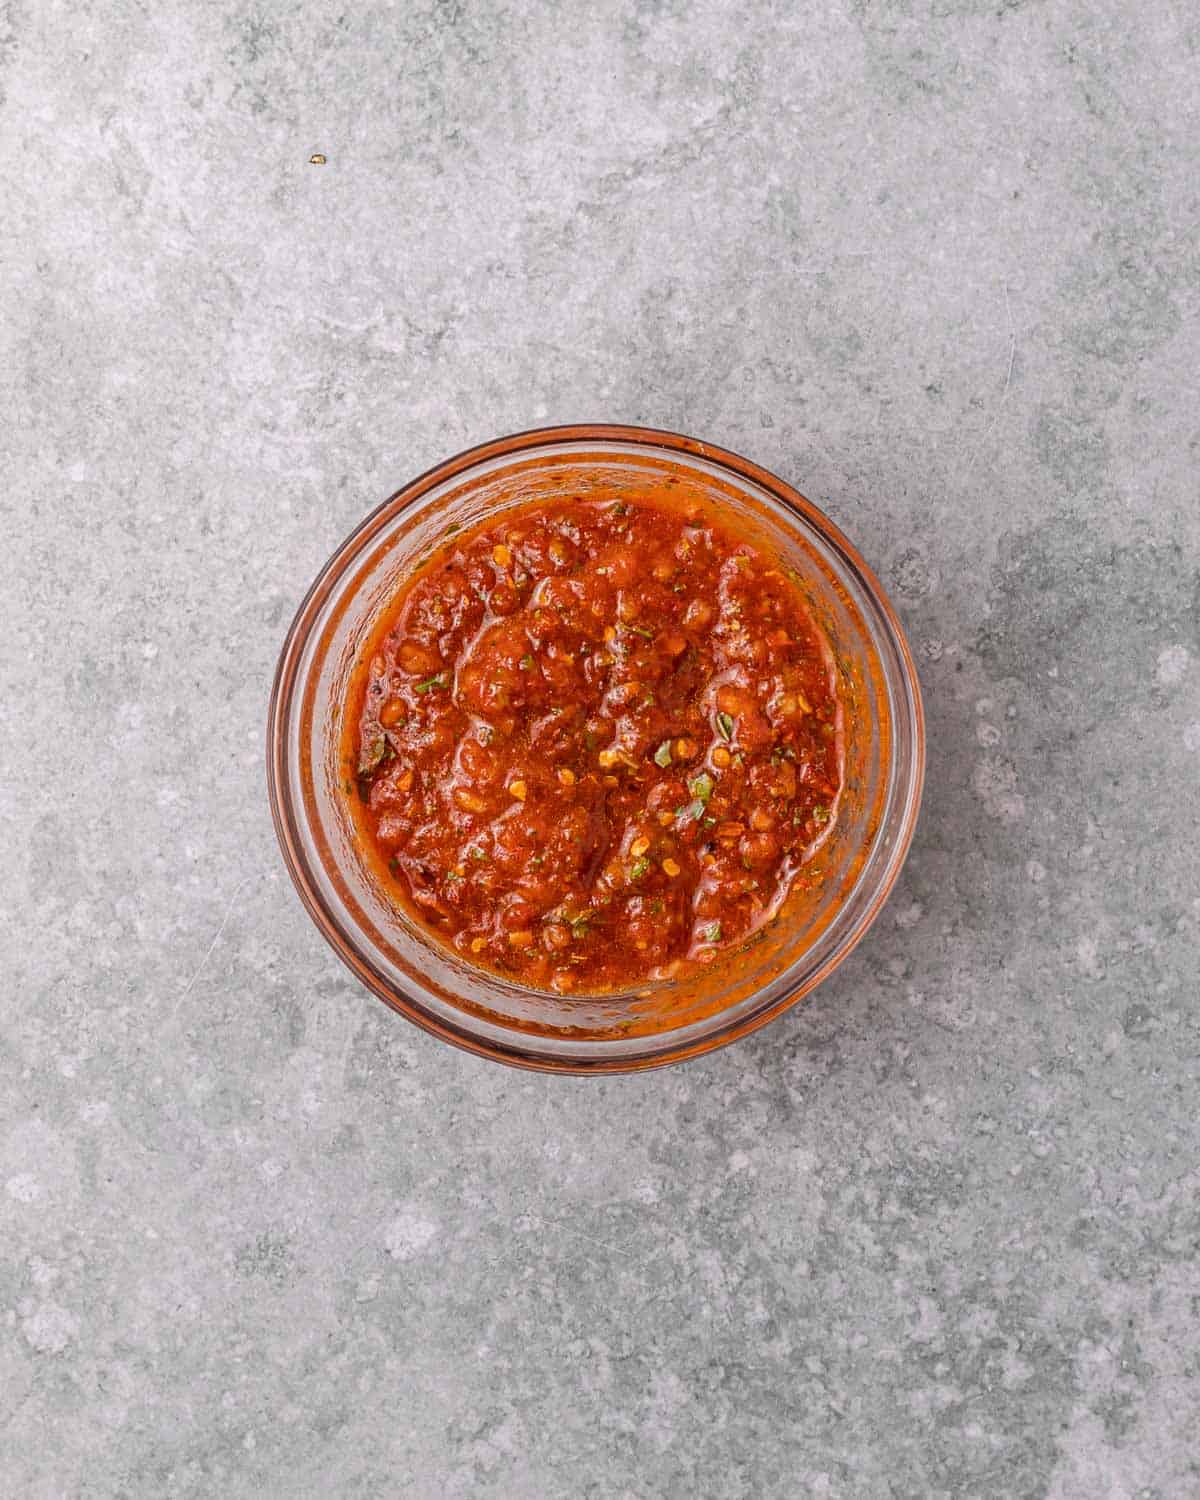 Tomato marinade sauce in a small bowl.